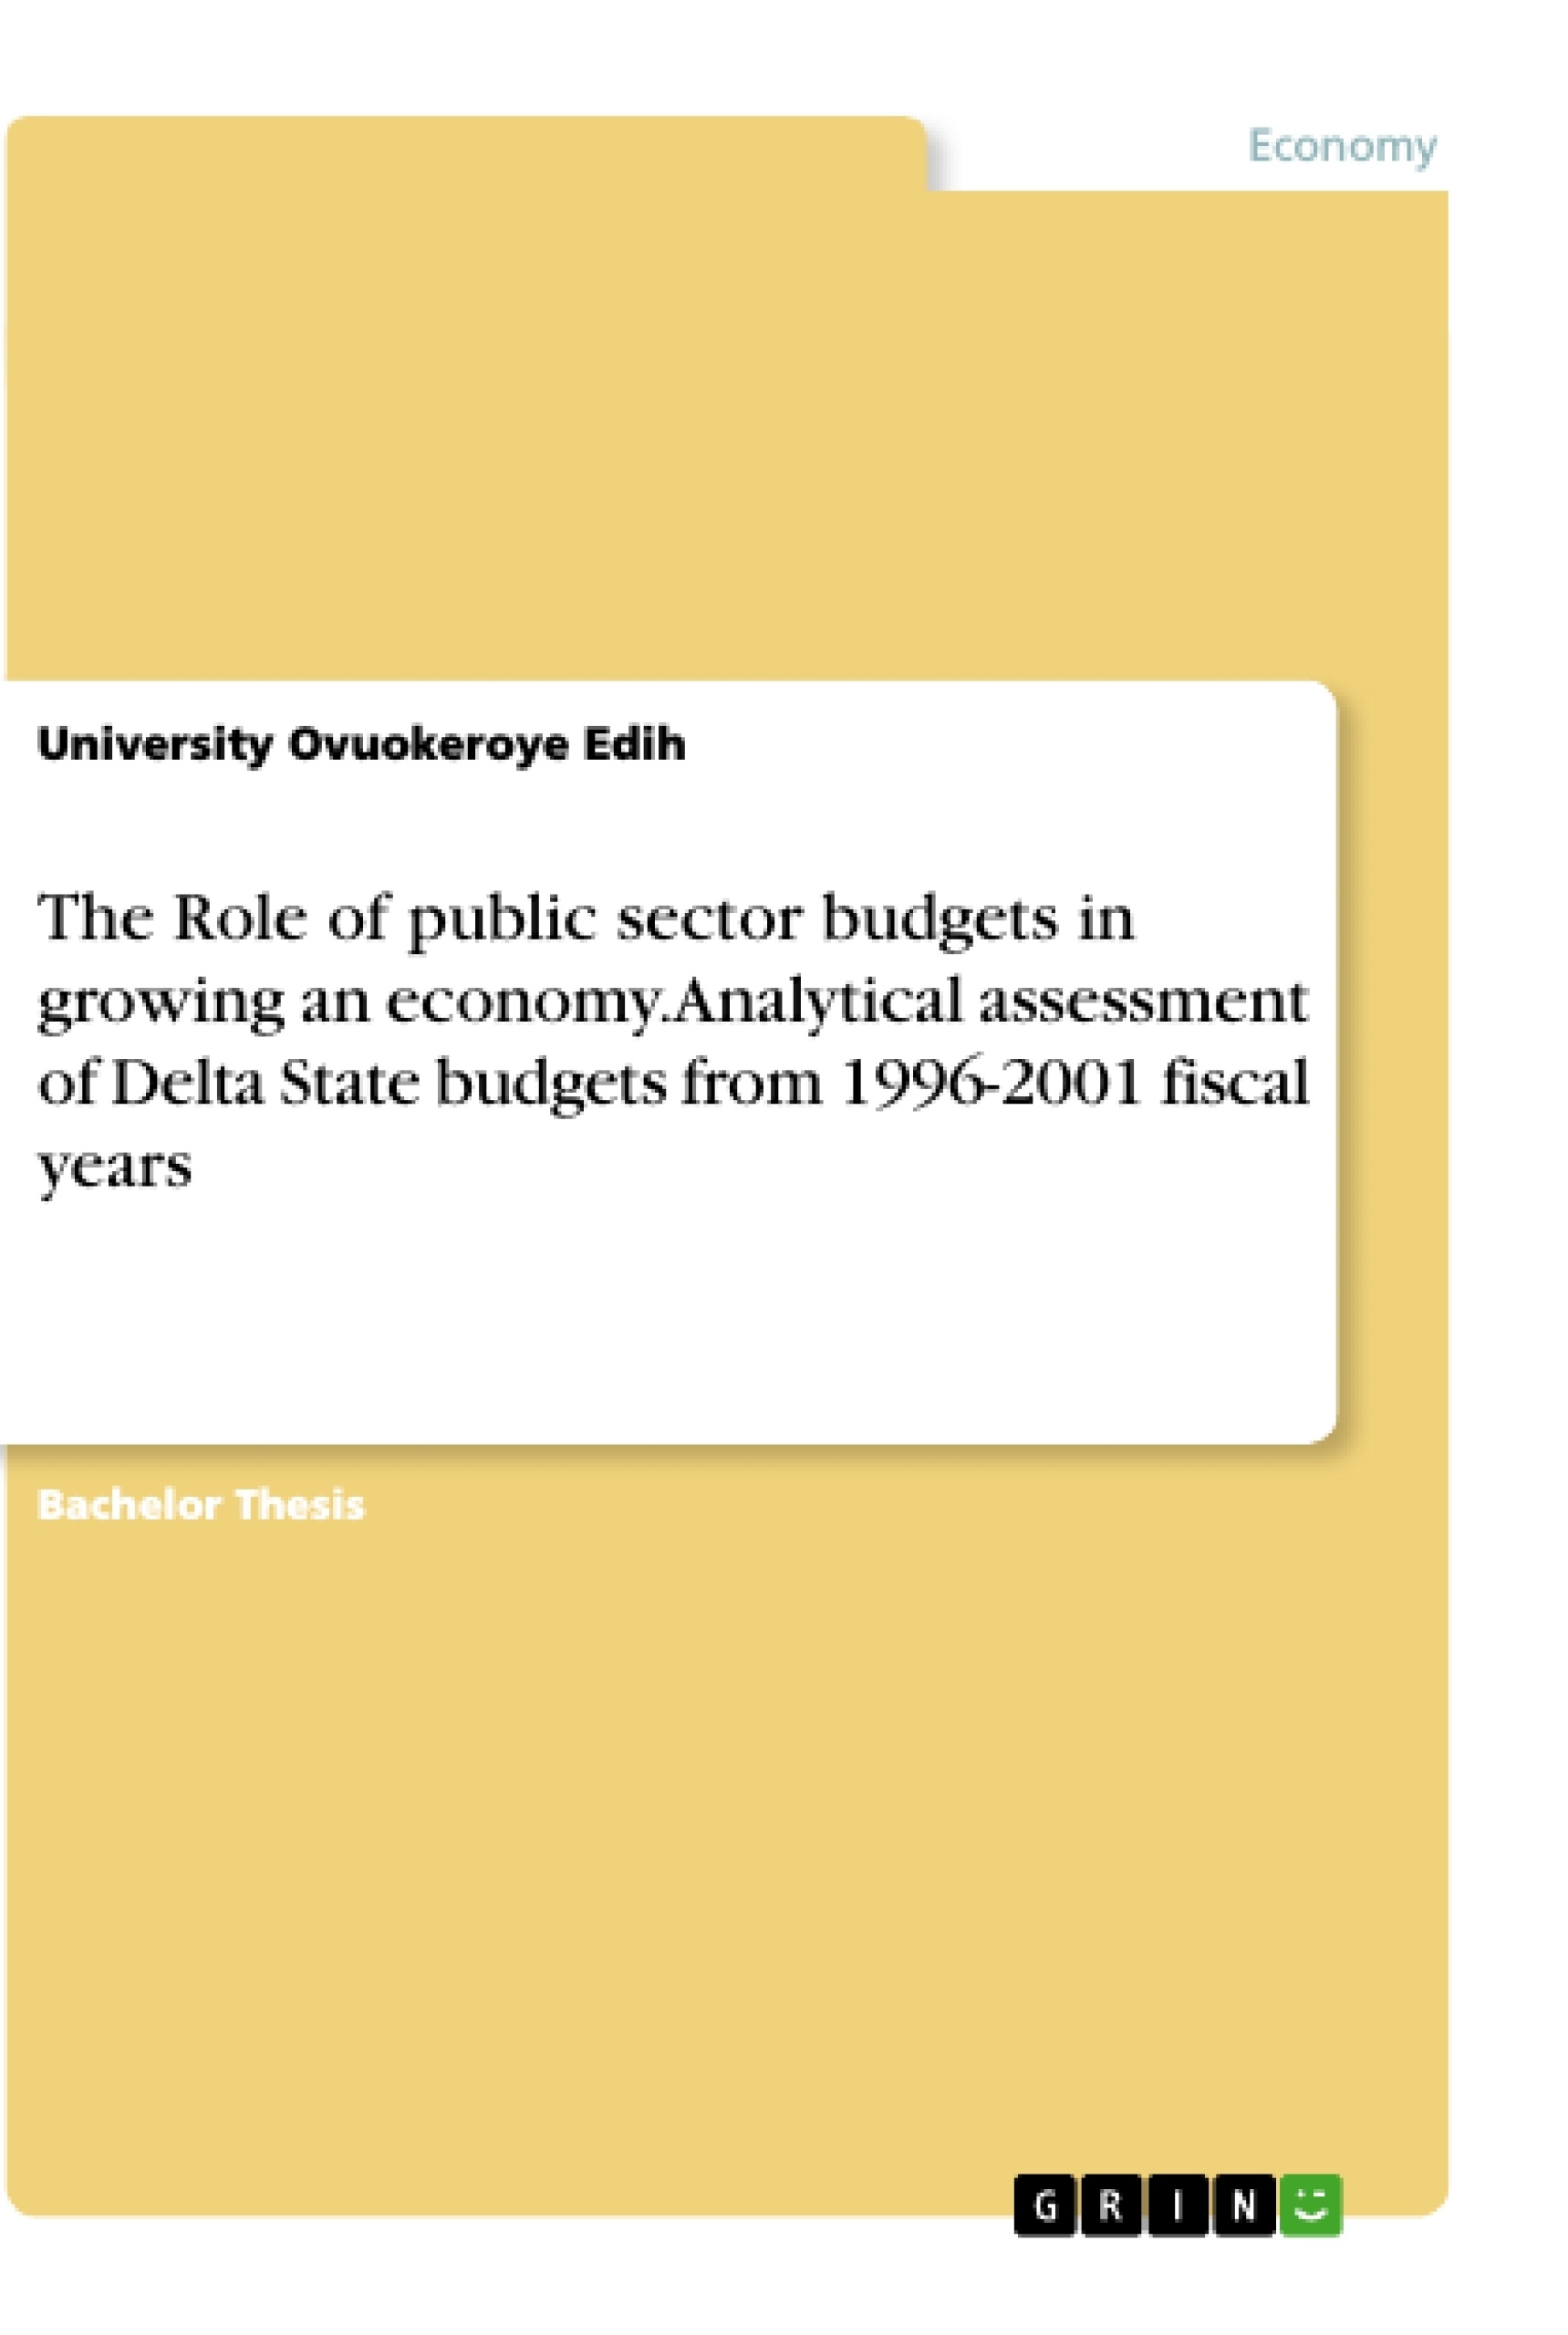 Title: The Role of public sector budgets in growing an economy. Analytical assessment of Delta State budgets from 1996-2001 fiscal years